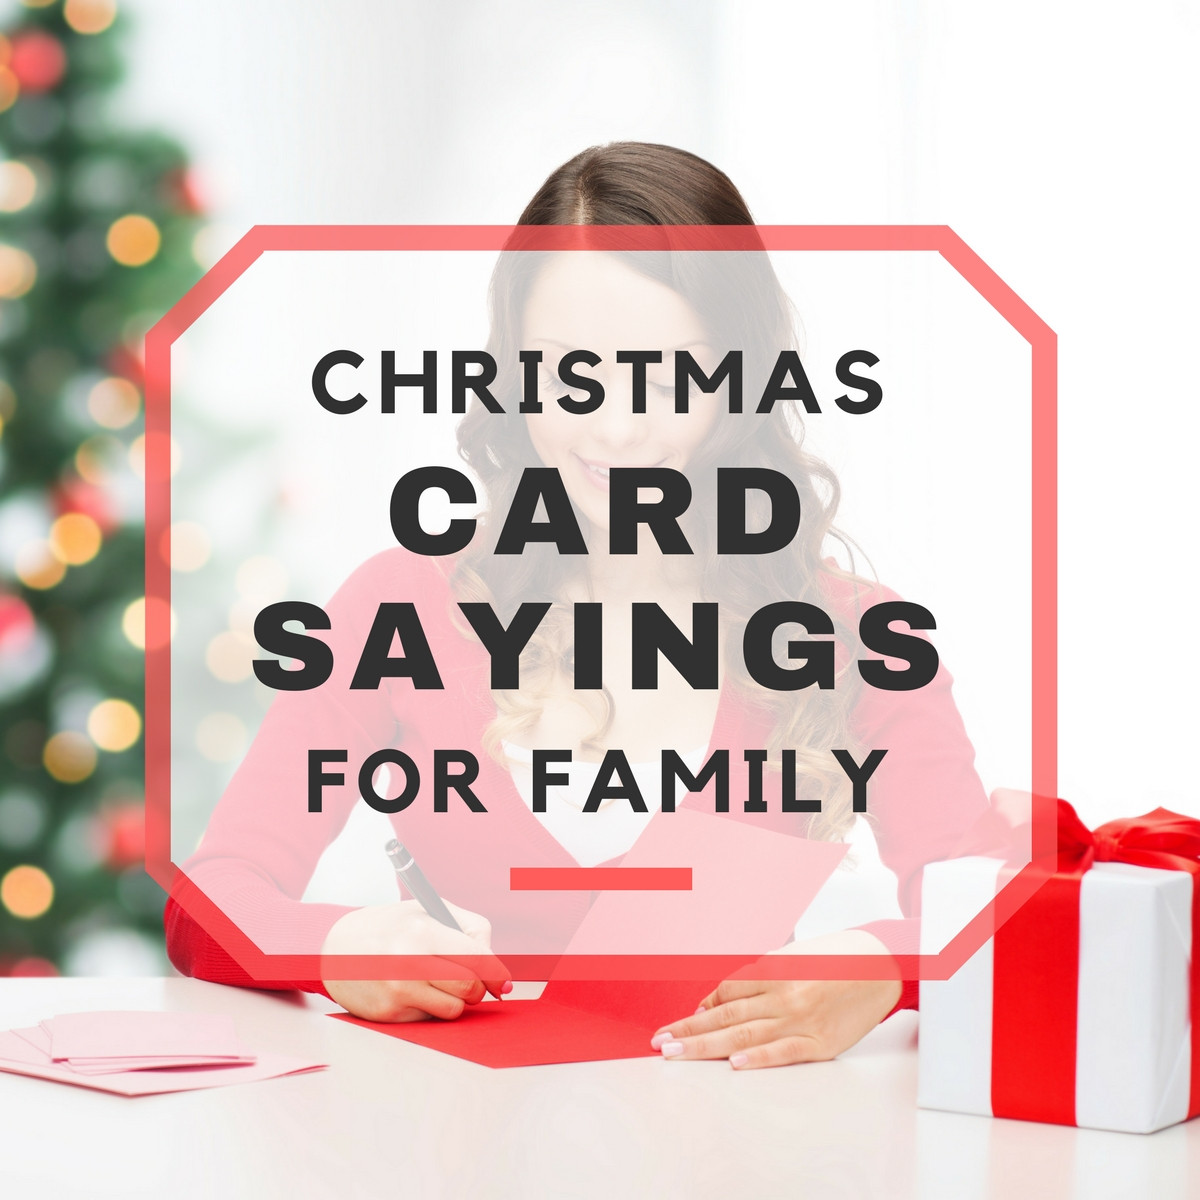 Quotes For Christmas Cards
 25 Christmas Card Sayings for Family